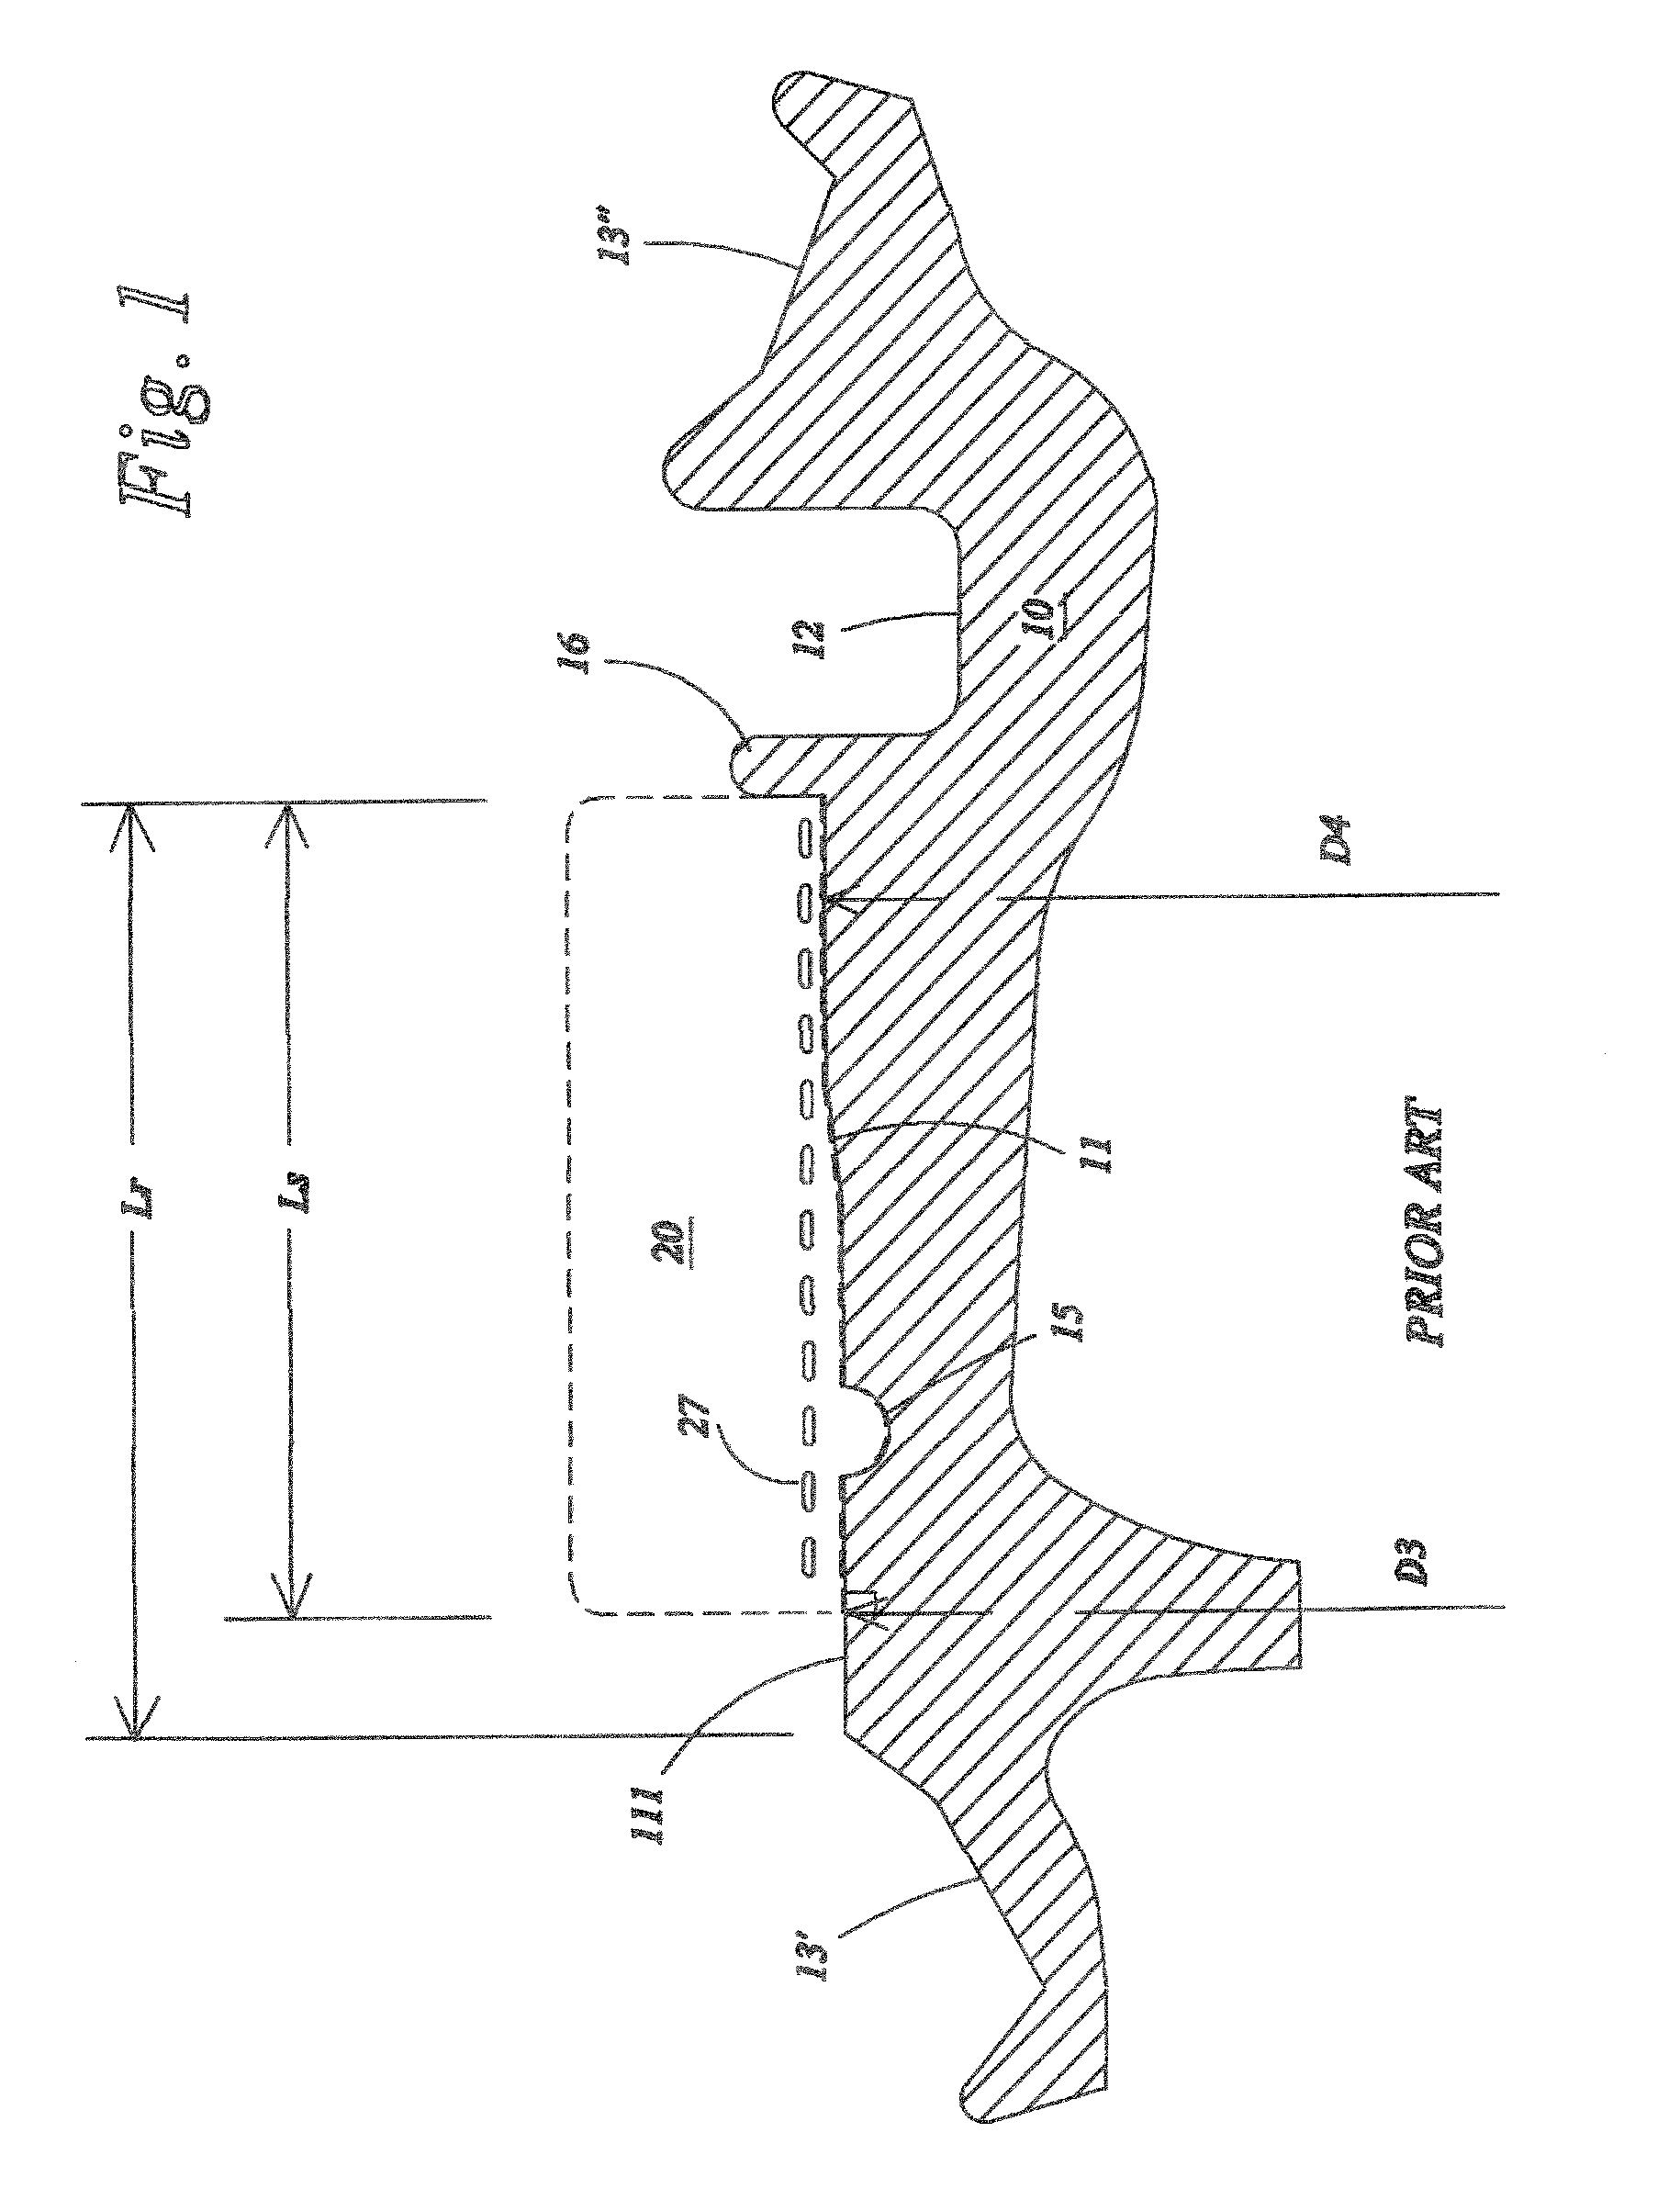 Assembly comprising a rim and a run-flat support